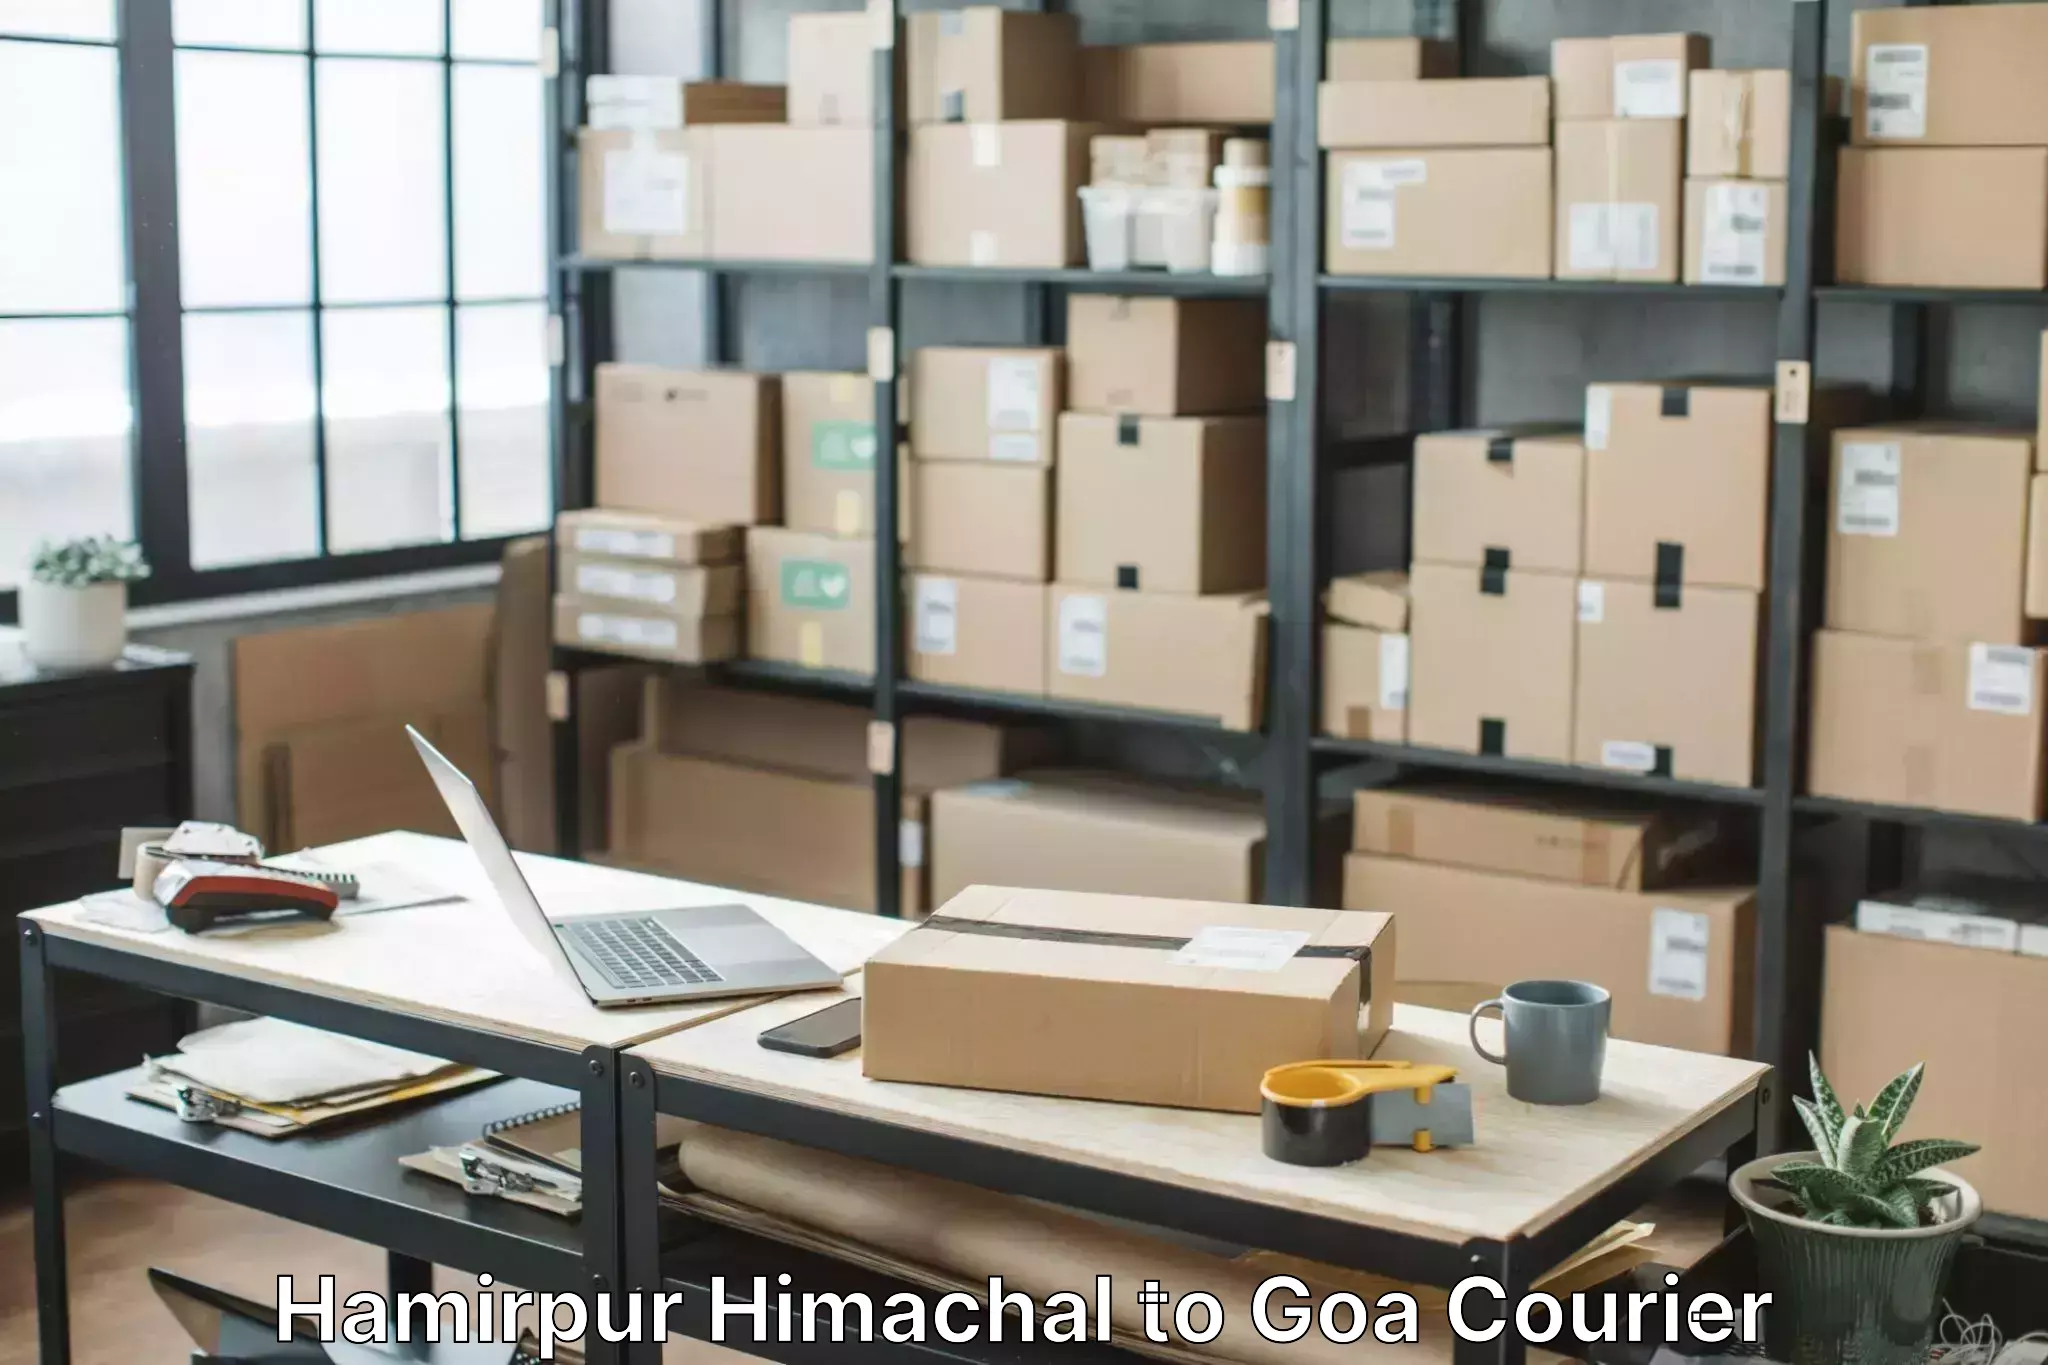 Furniture delivery service Hamirpur Himachal to South Goa